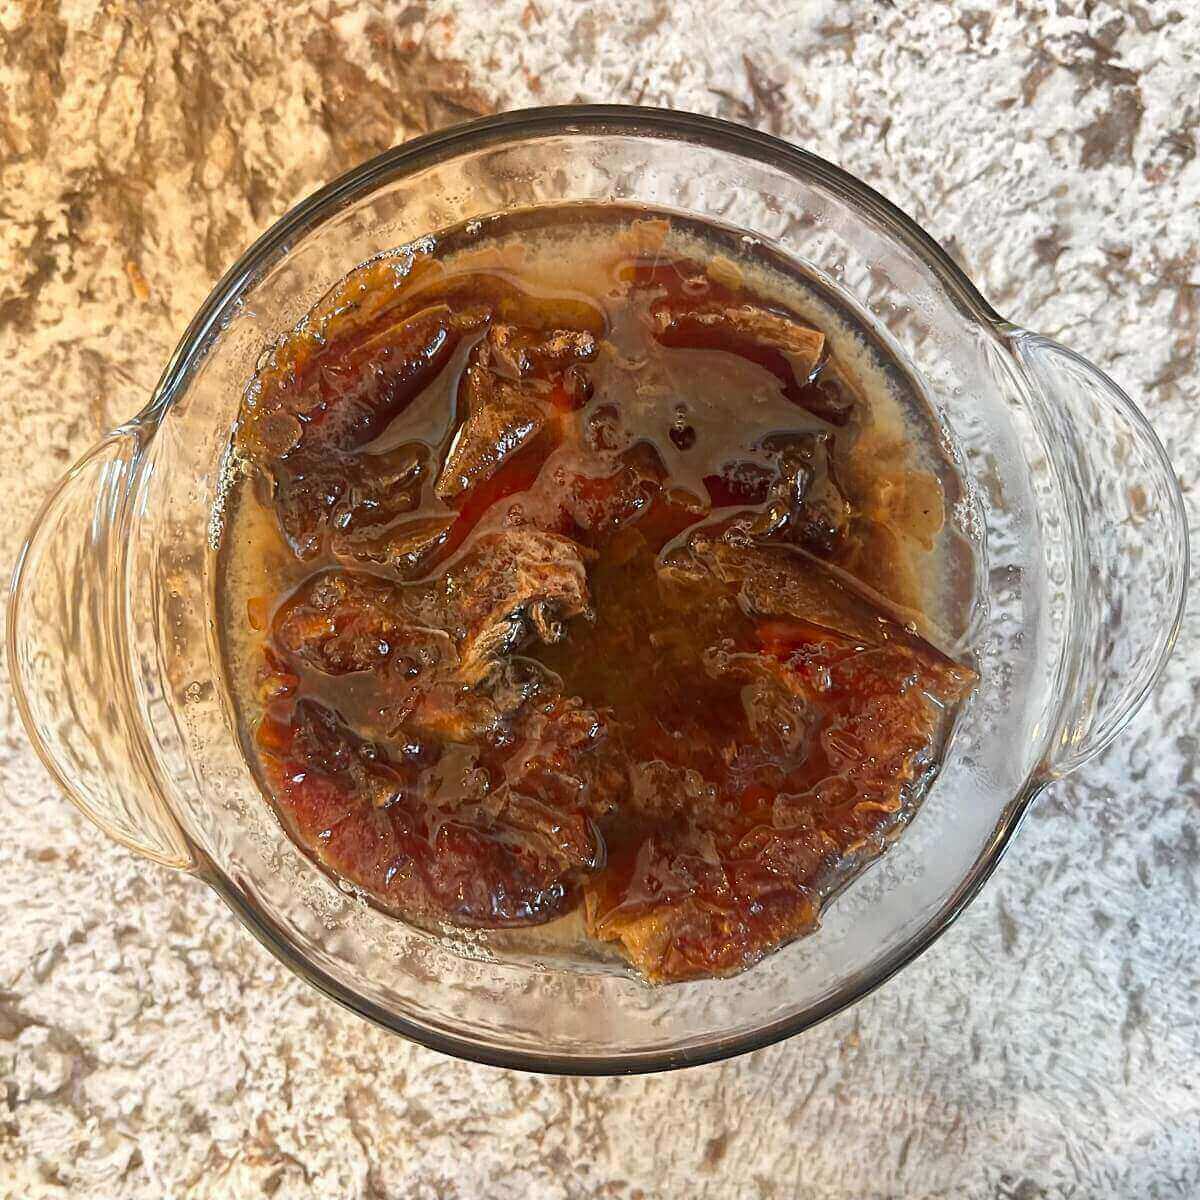 Dates soaking in boiling water in a glass bowl.